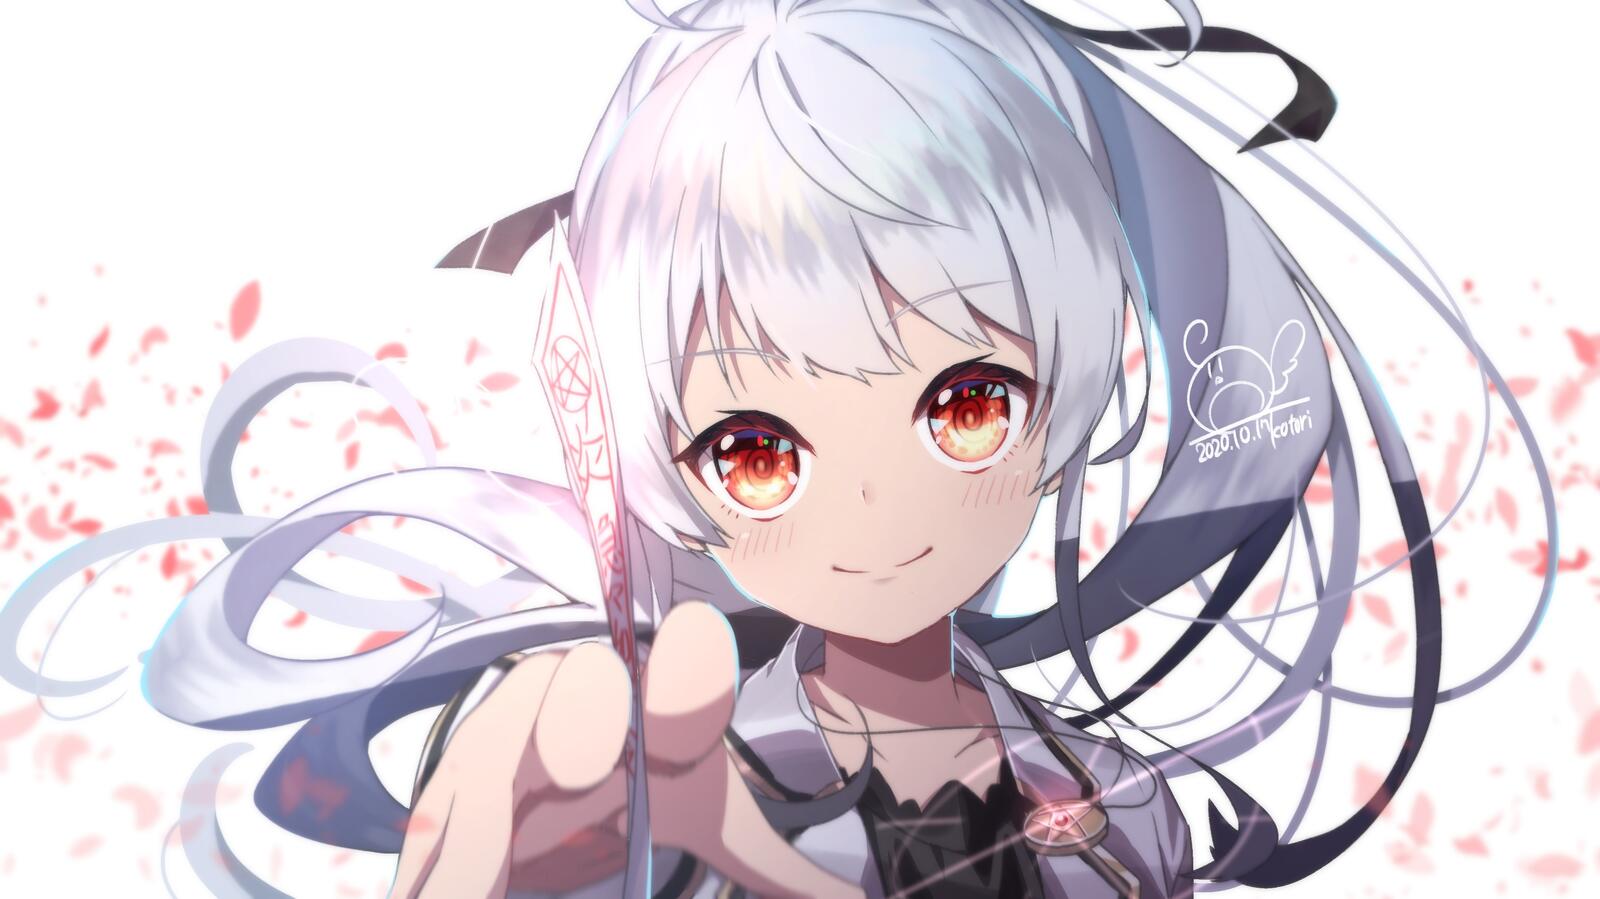 Wallpapers beautiful anime girl white hair face portrait on the desktop